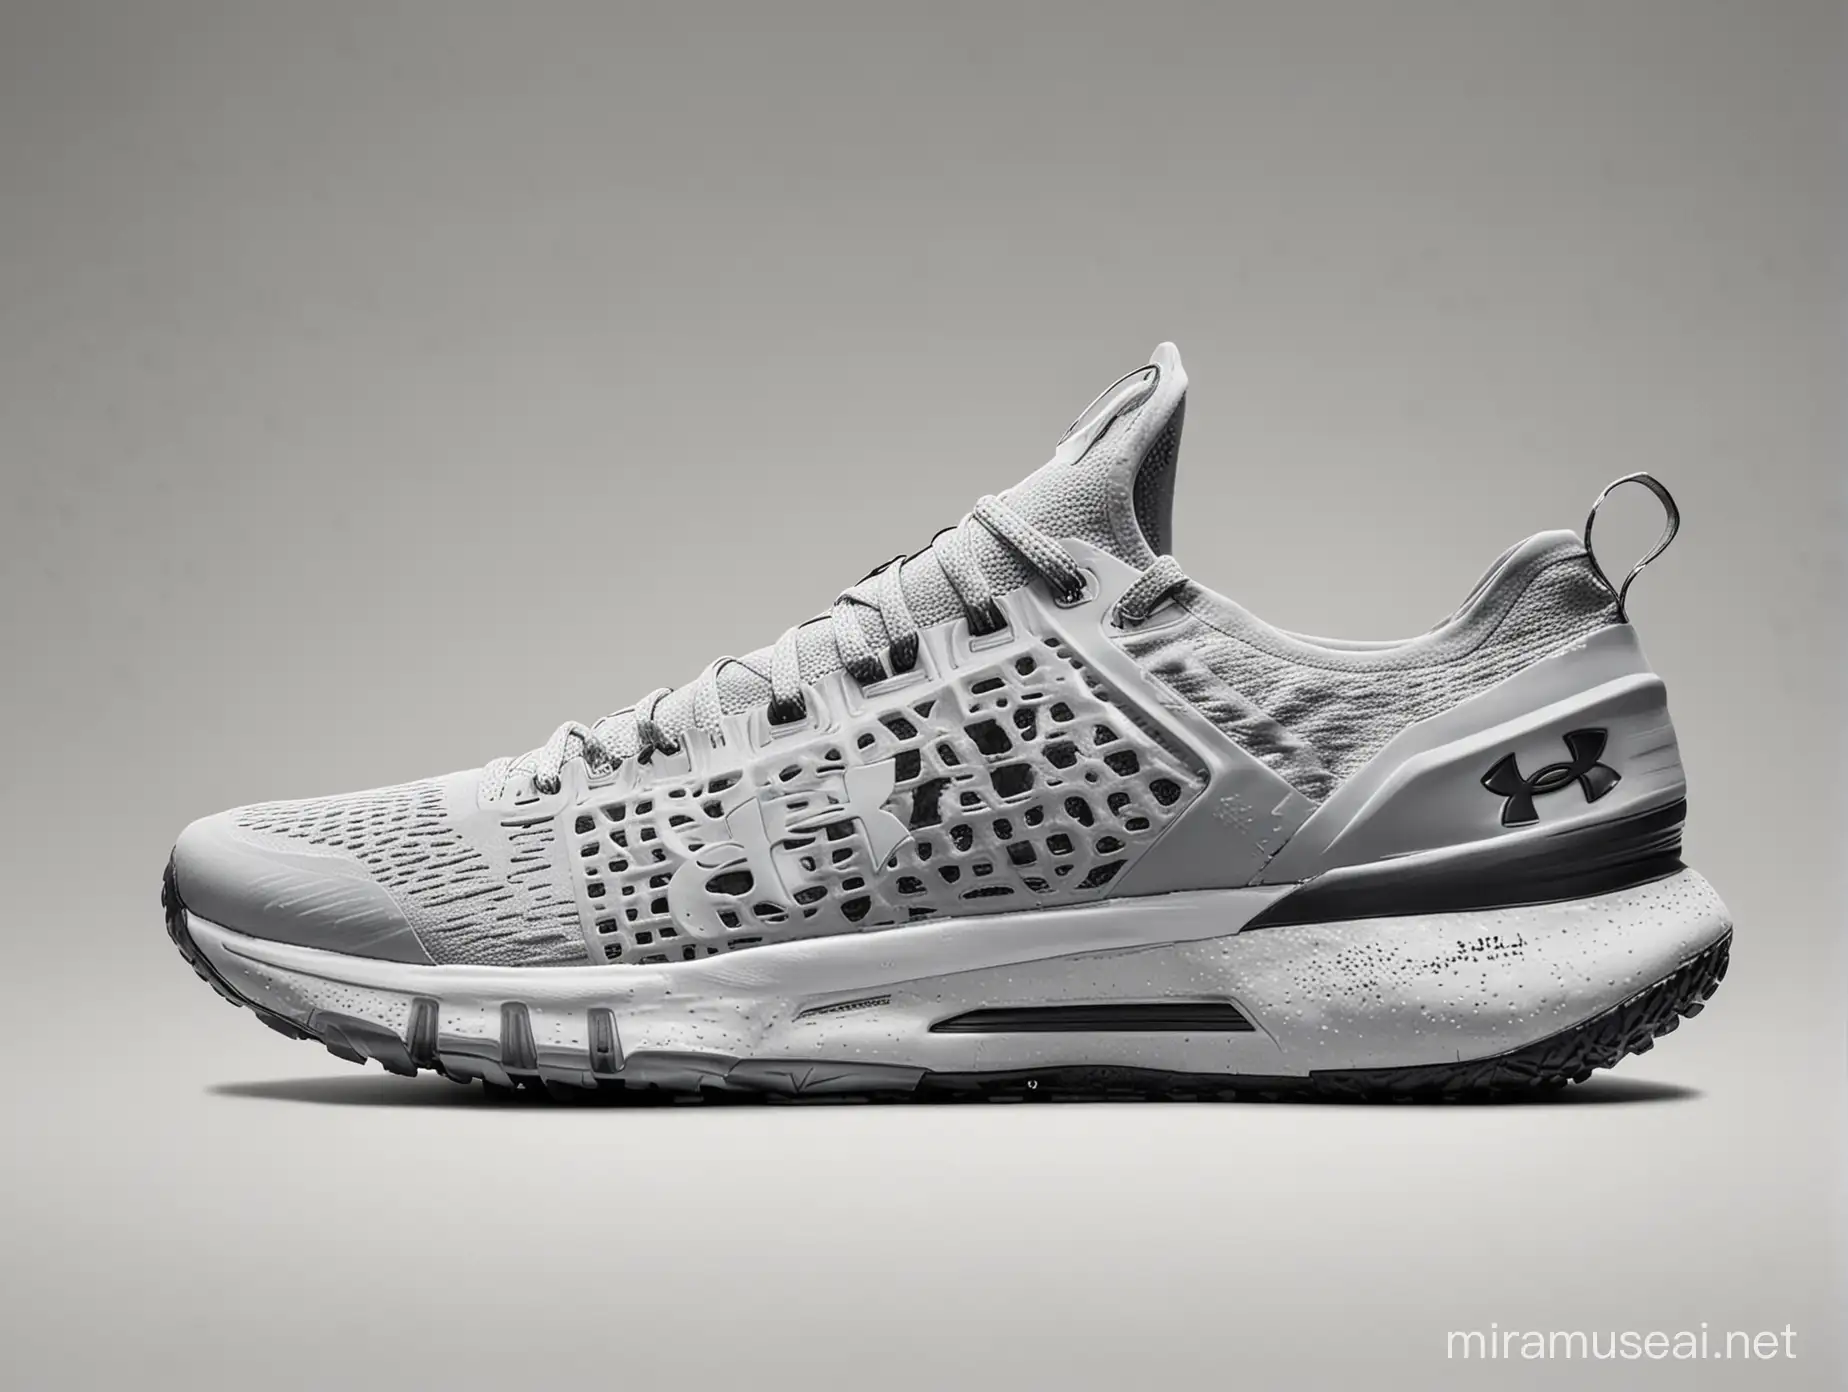 Under Armour Project Rock 6 Running Shoes in Light Grey Setting